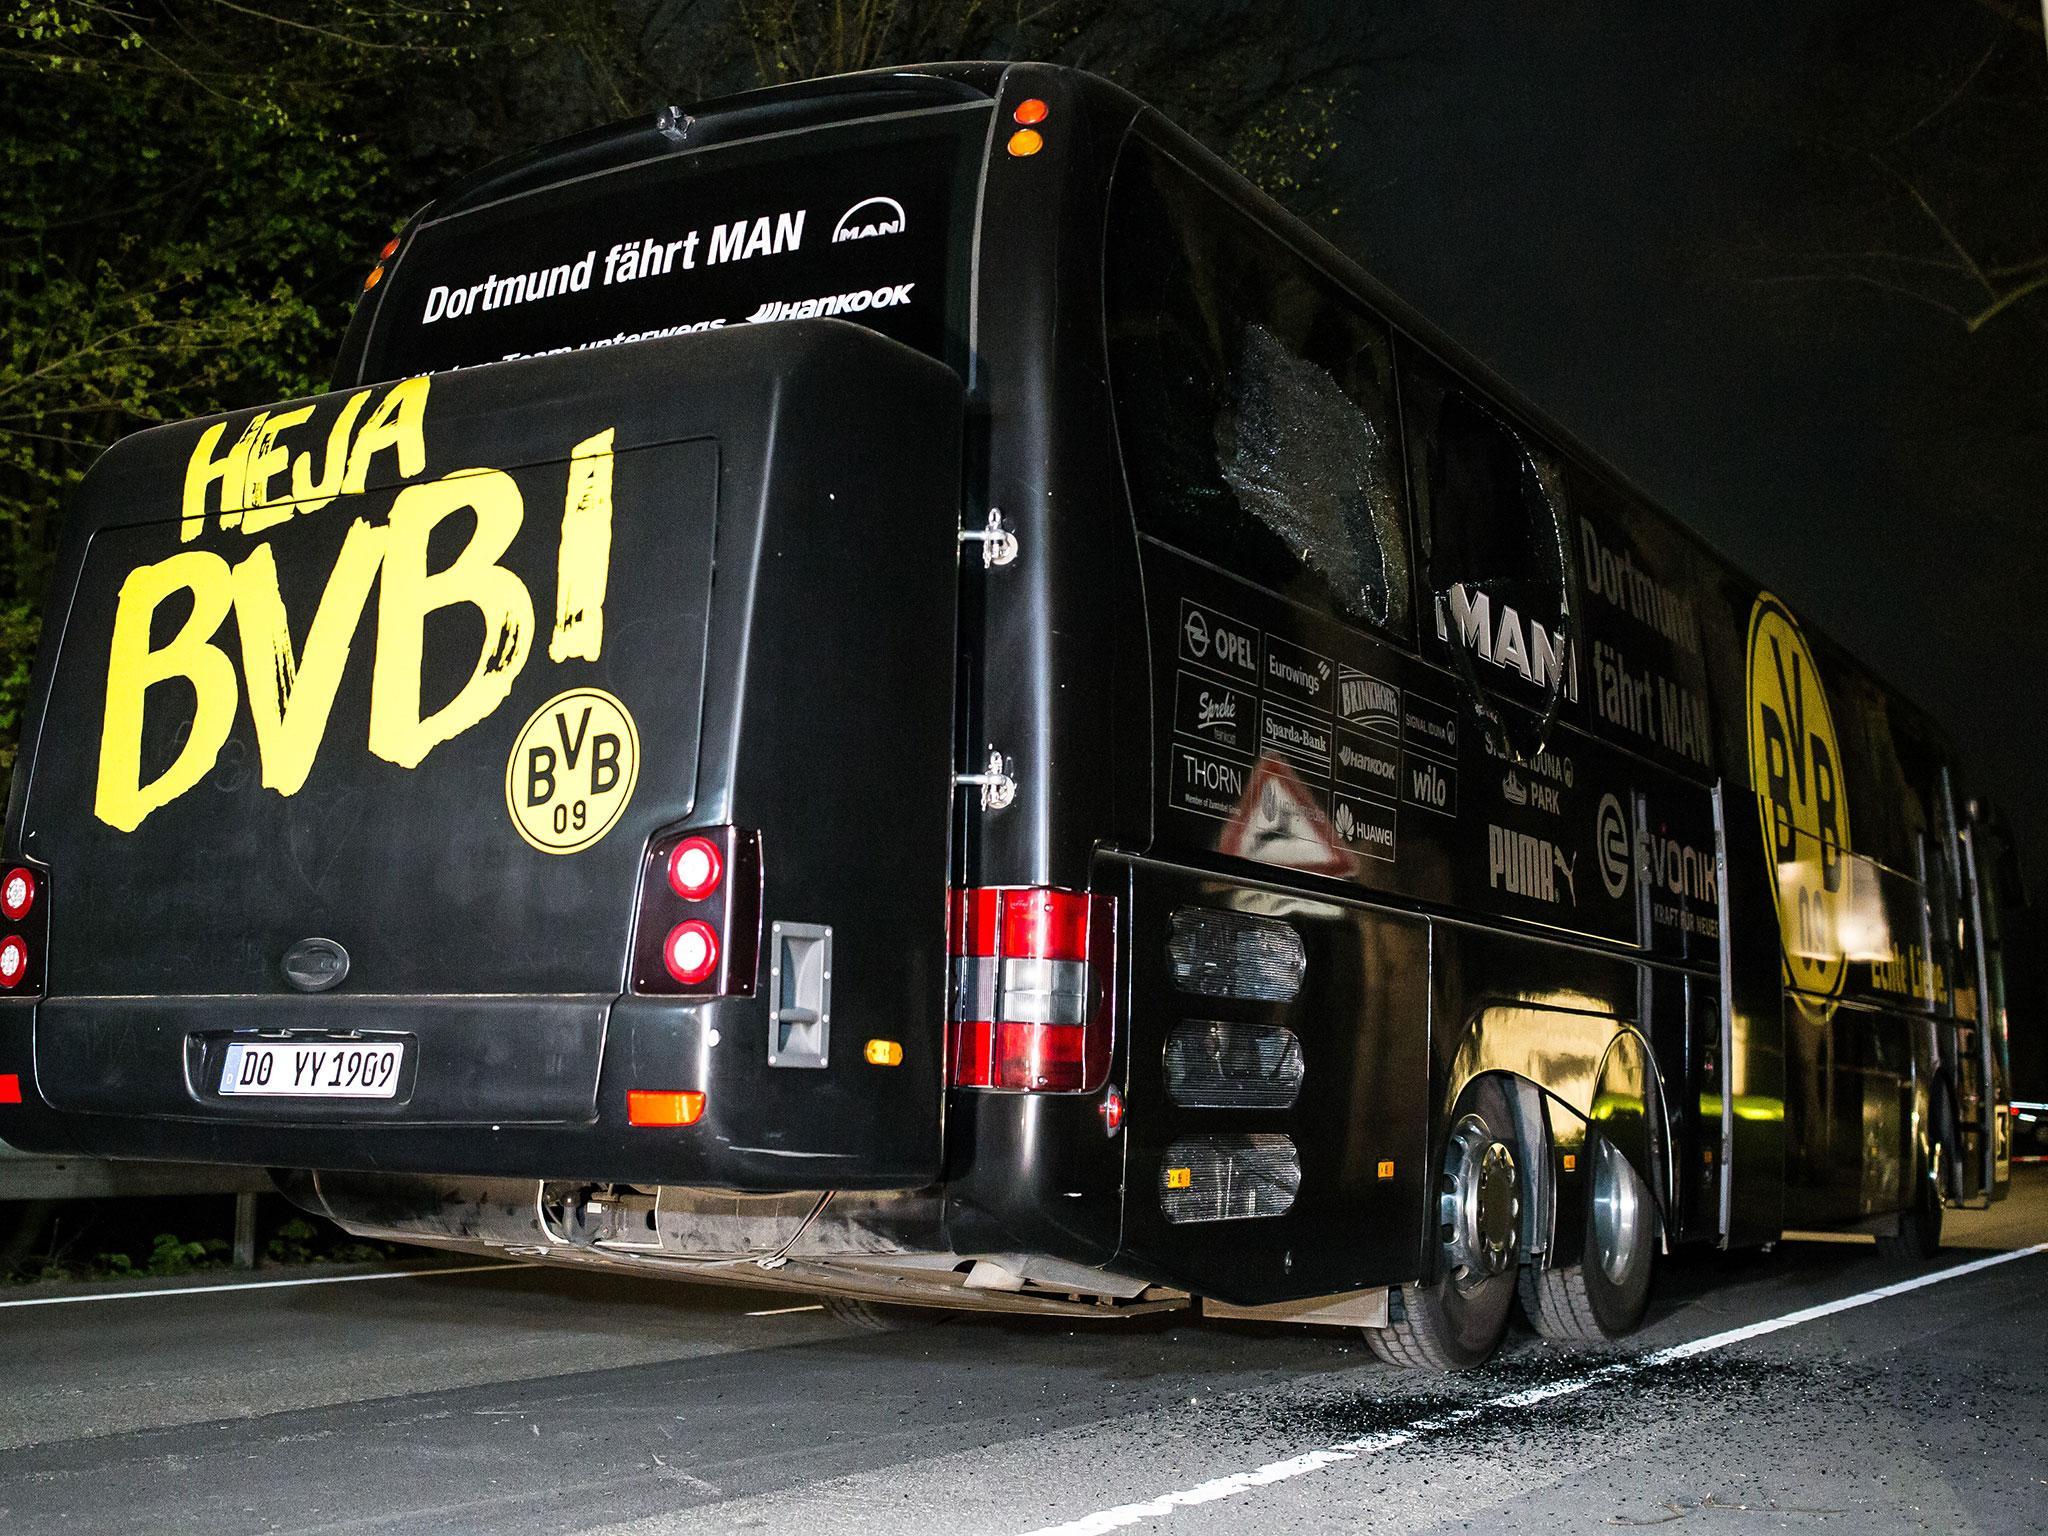 The team bus for Borussia Dortmund football club was damaged in an explosion